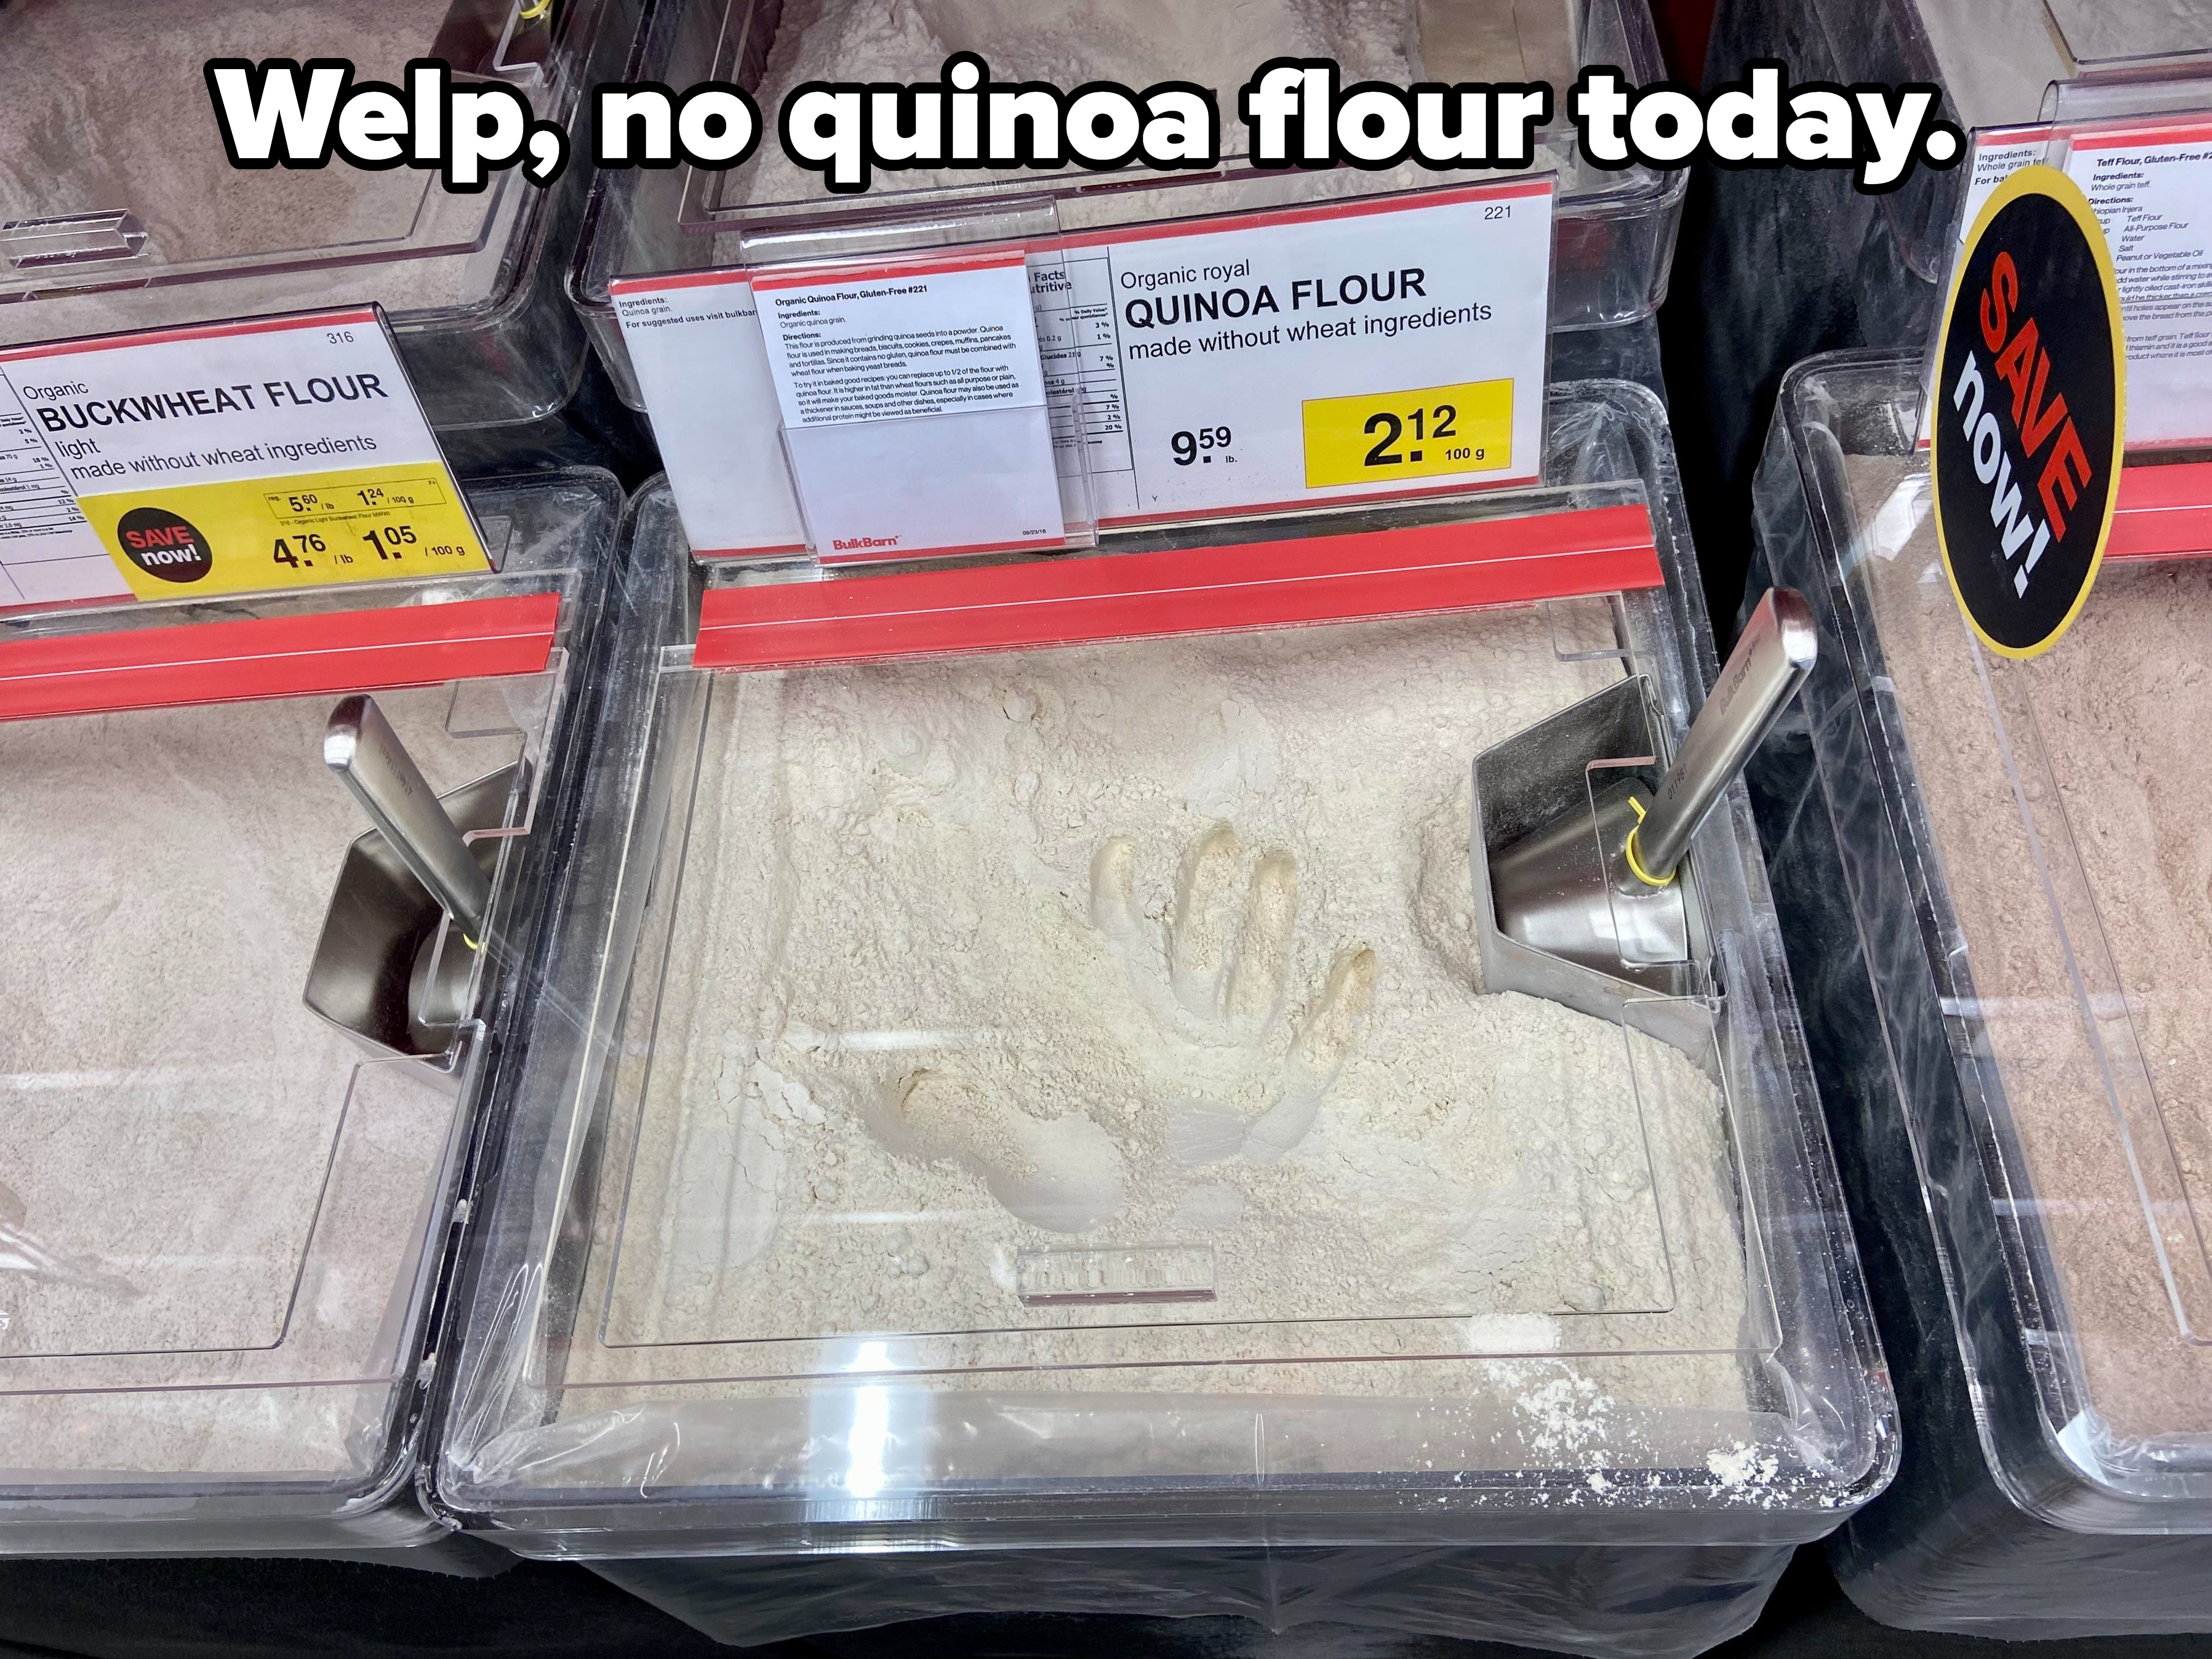 A handprint in a bin of quinoa flour at the store, with the caption &quot;Welp, no quinoa flour today&quot;